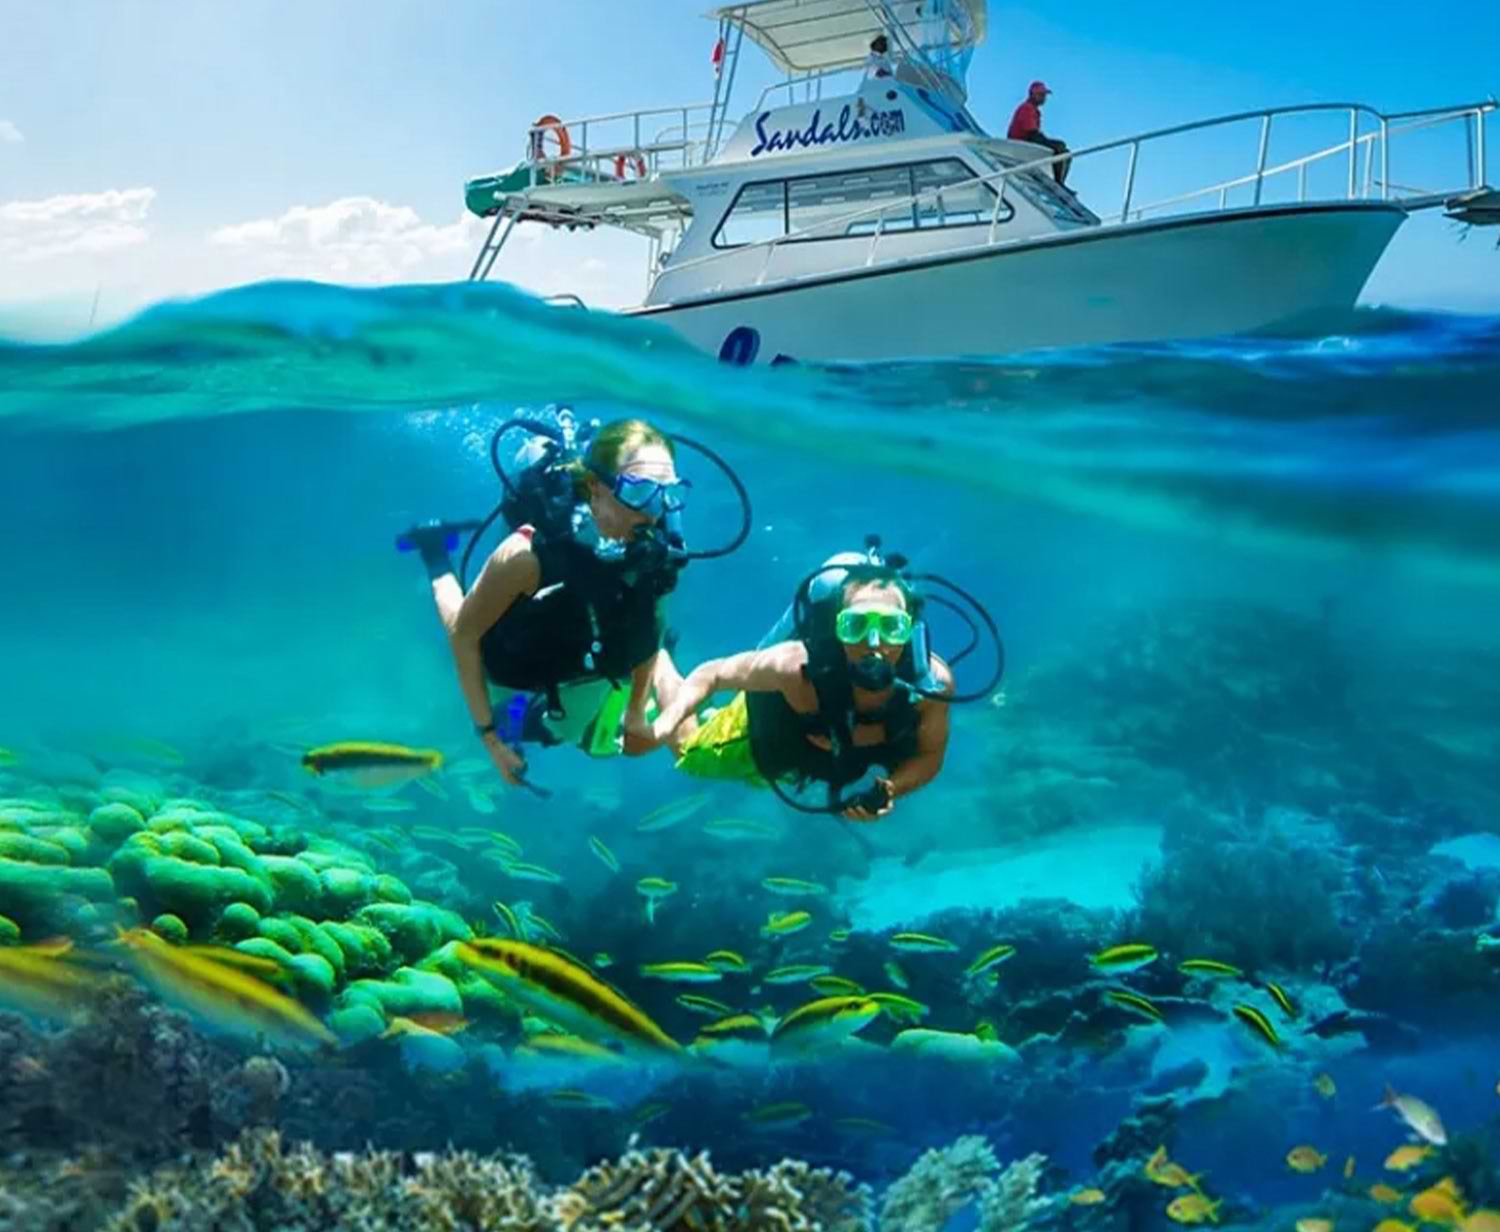 two people scuba dive among yellow fish as a boat floats in the background